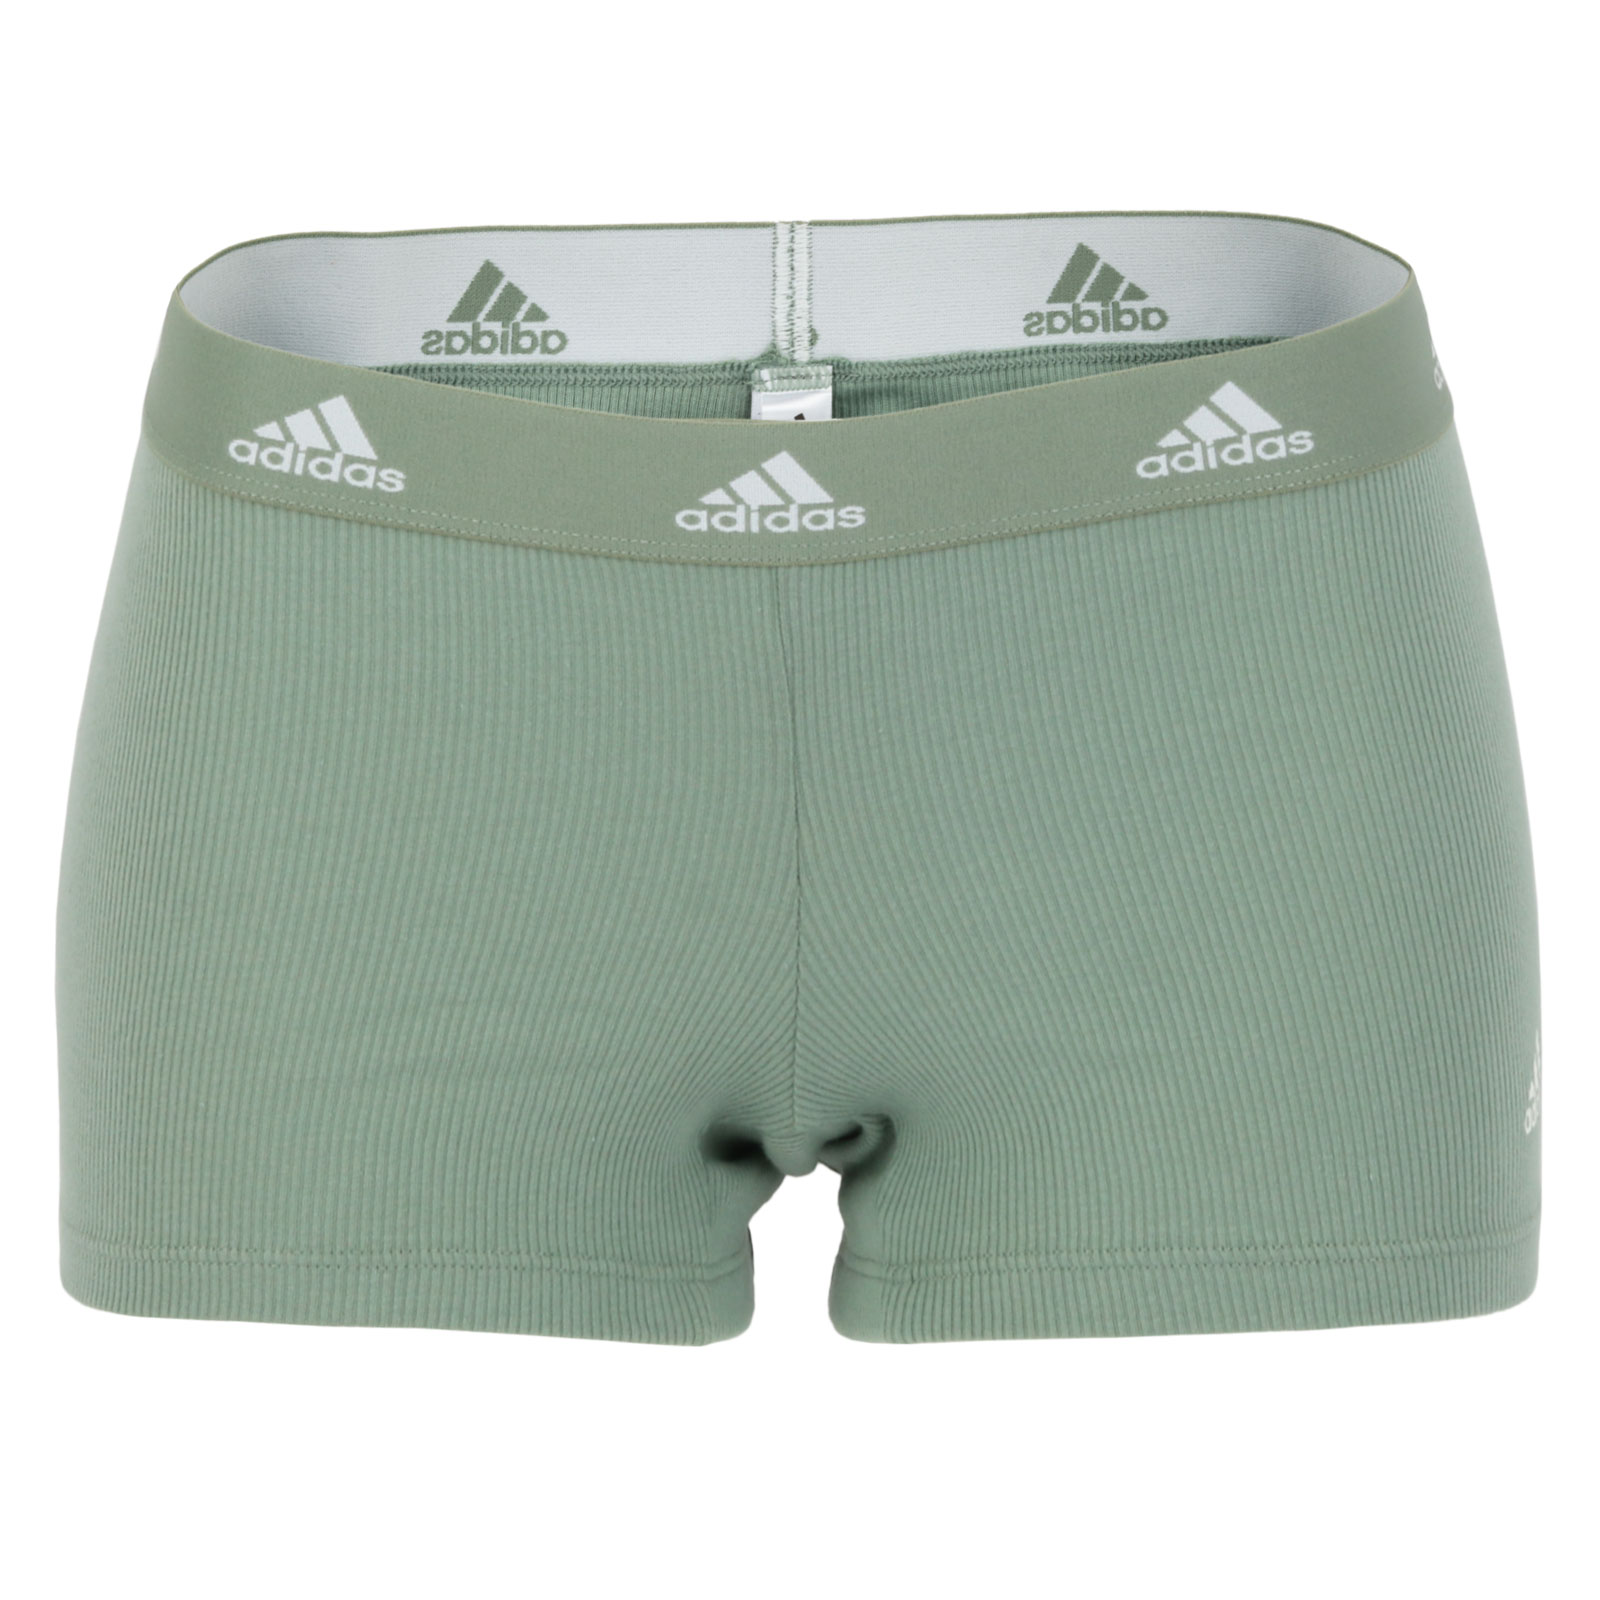 Picture of adidas Sports Underwear Boxer Shorts Women - 707-olive green